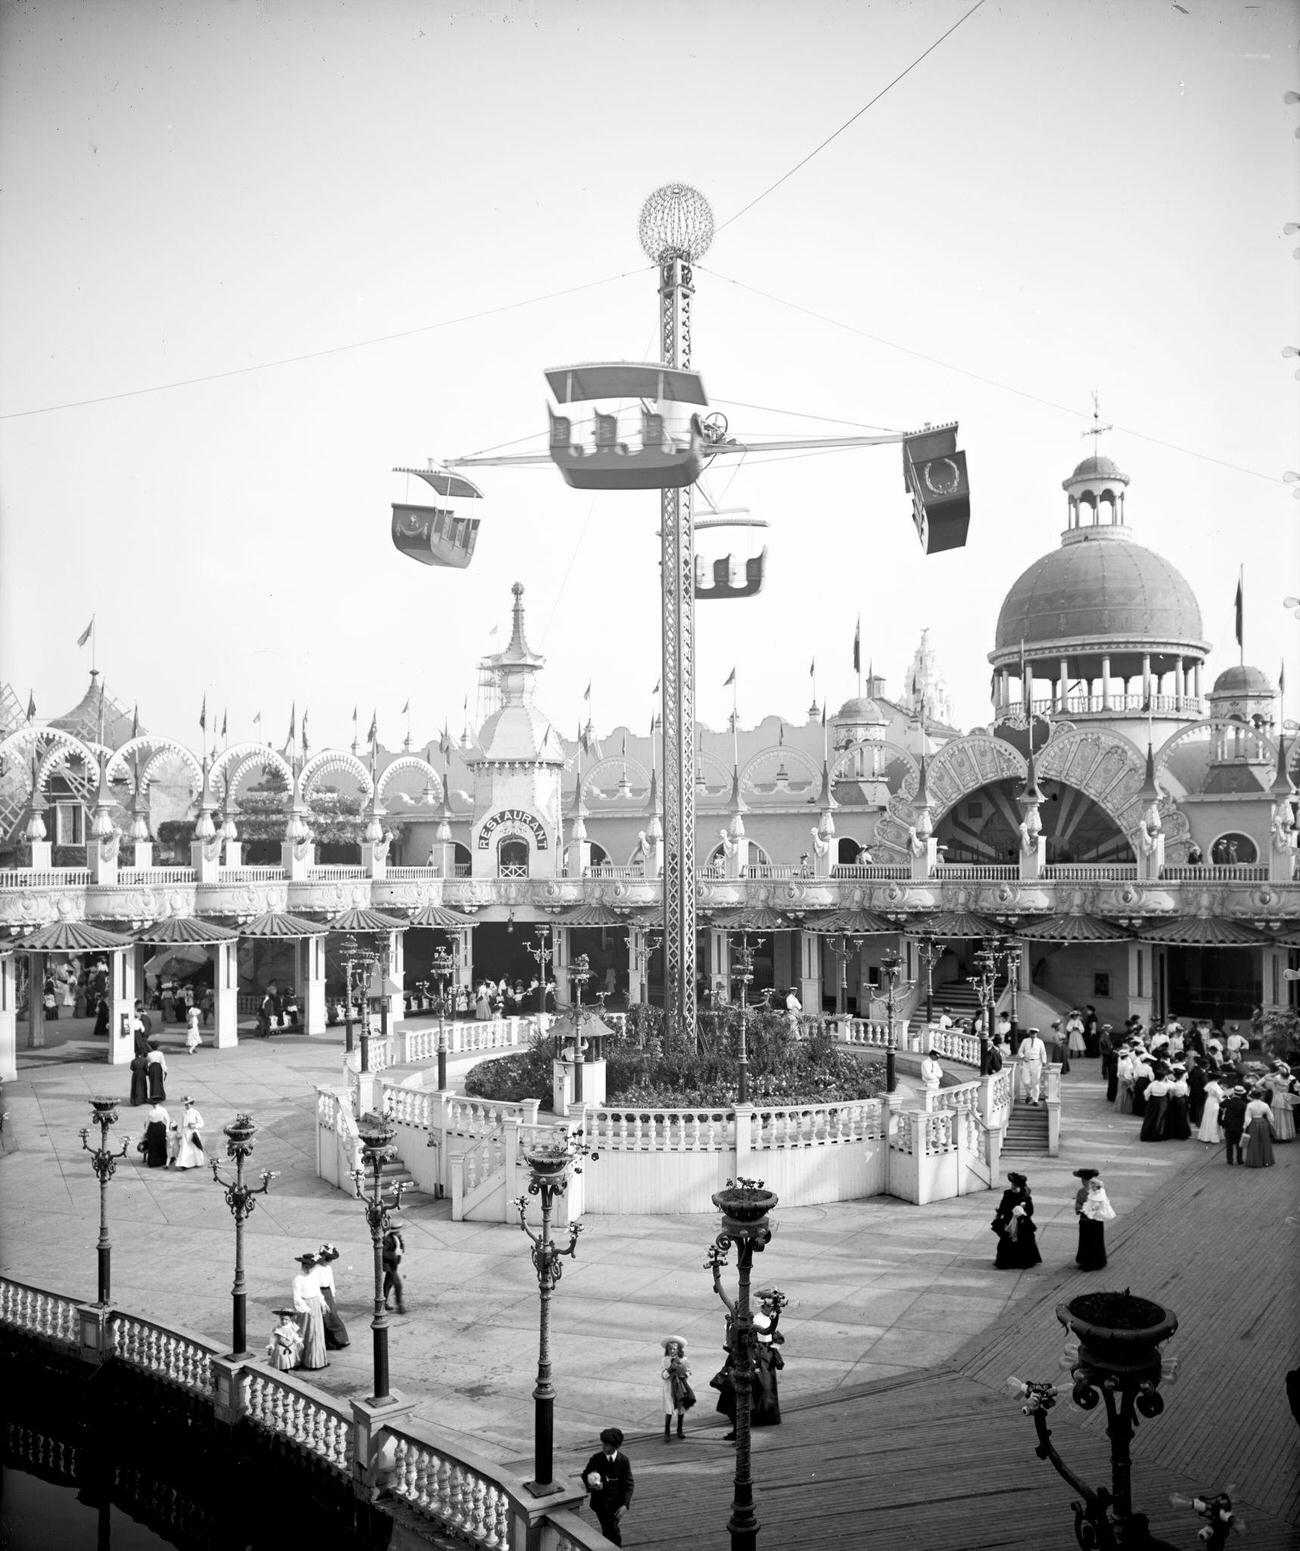 Whirl Of The Whirl Amusement Ride At Luna Park, Early 20Th Century